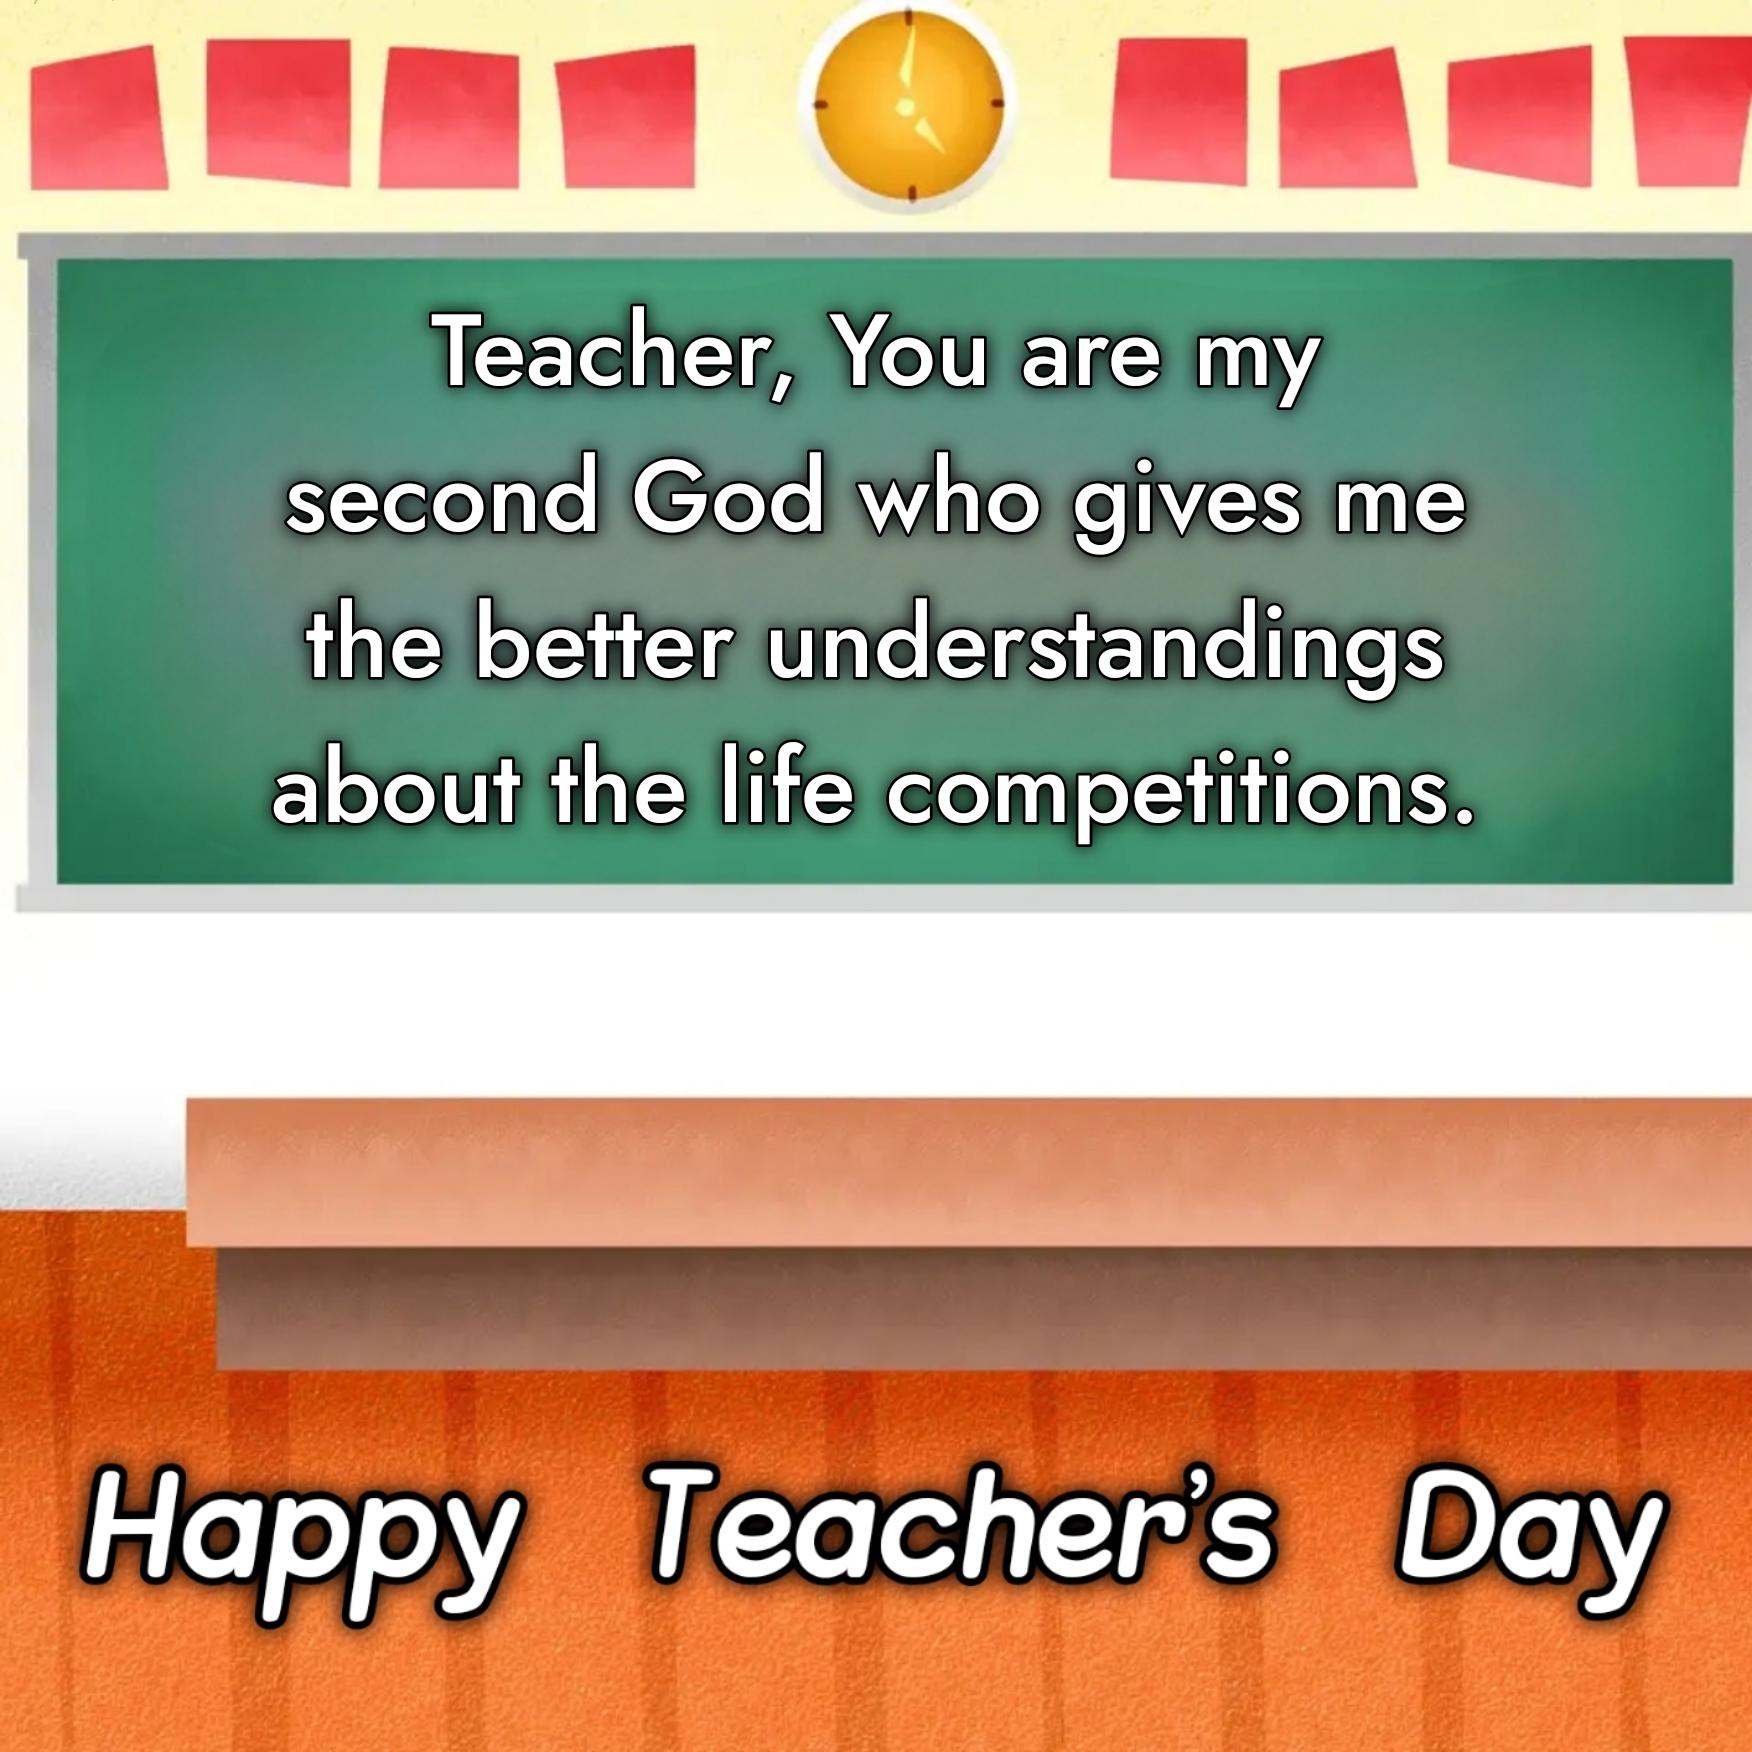 Teacher You are my second God who gives